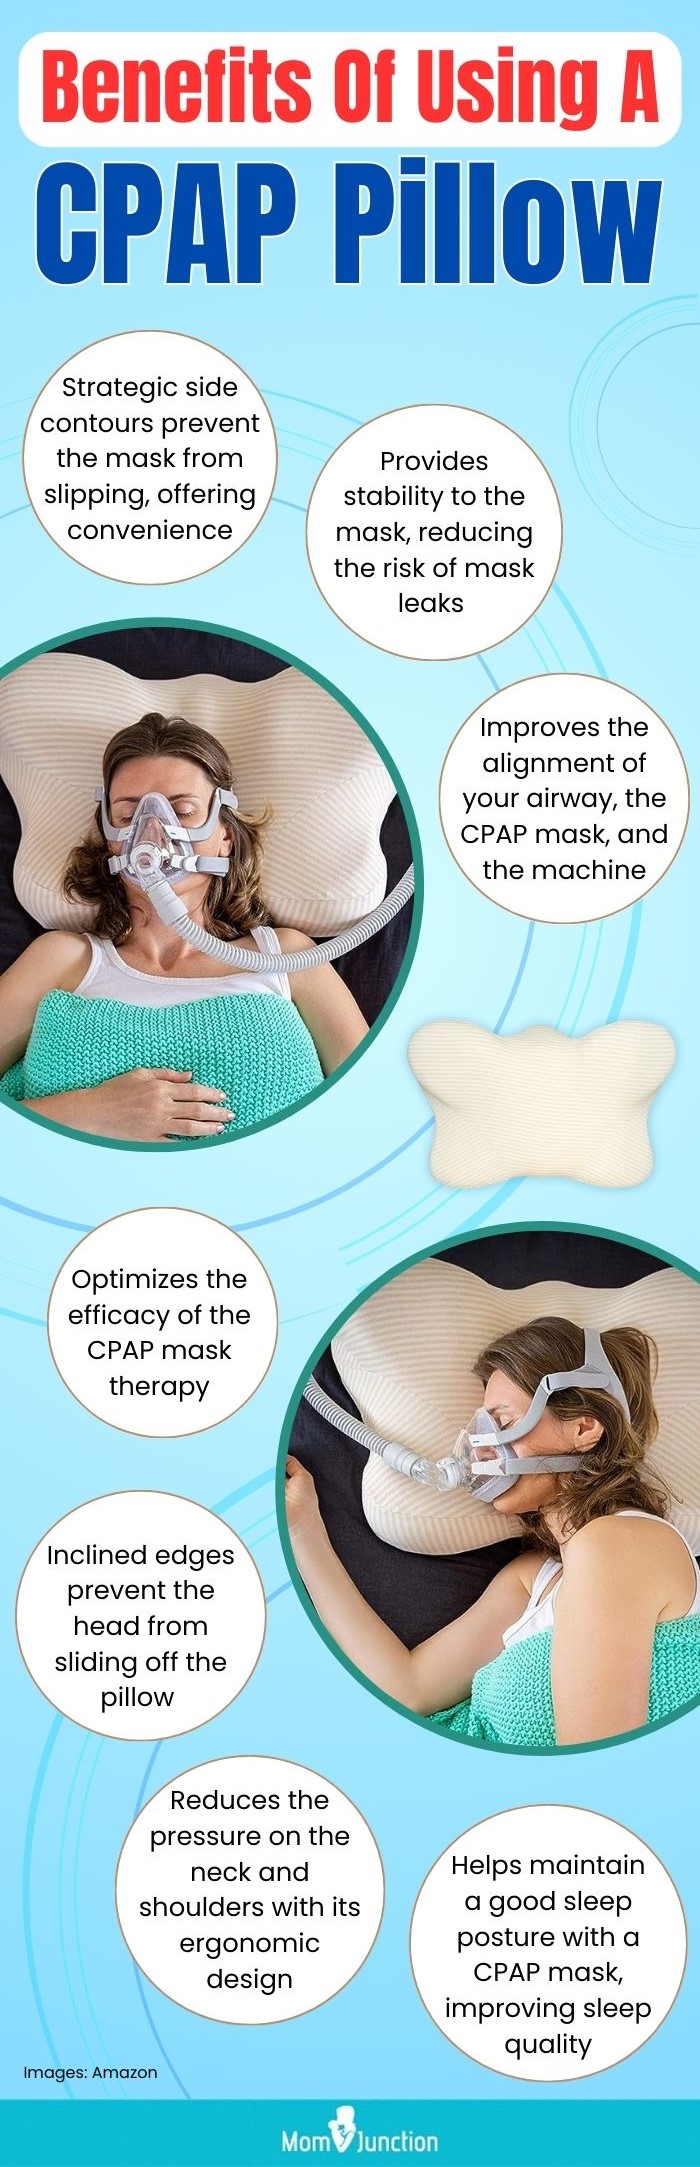 Benefits Of Using A CPAP Pillow (infographic)